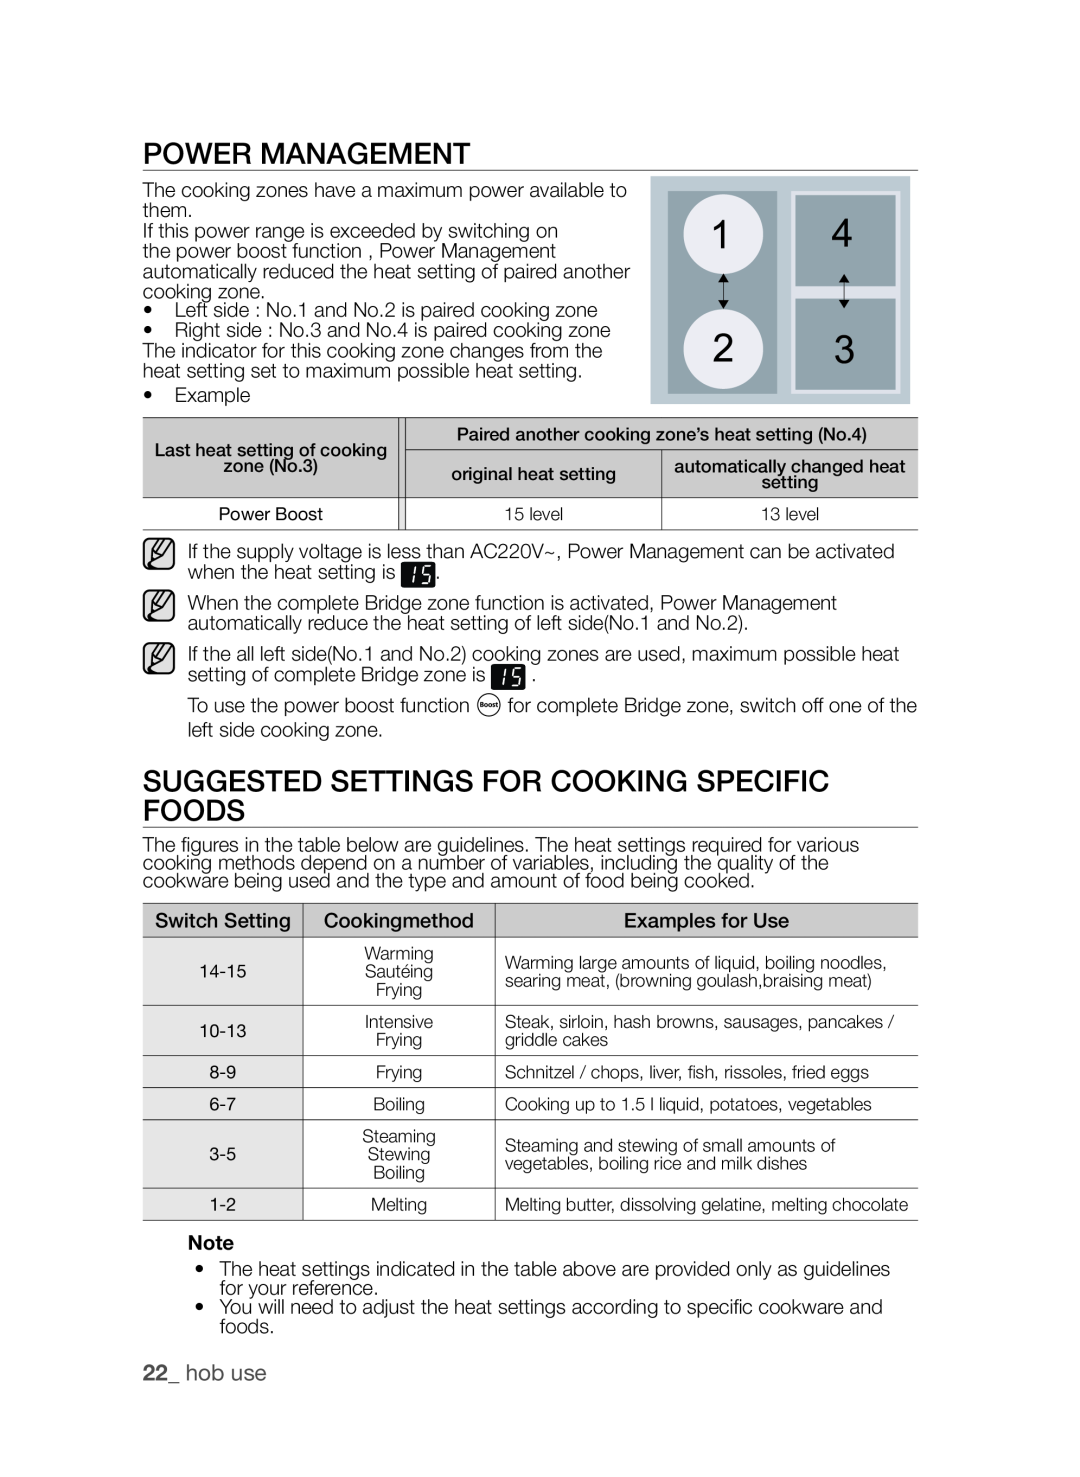 Samsung CTI613GI user manual Power Management, Suggested settings for cooking specific foods, hob use 